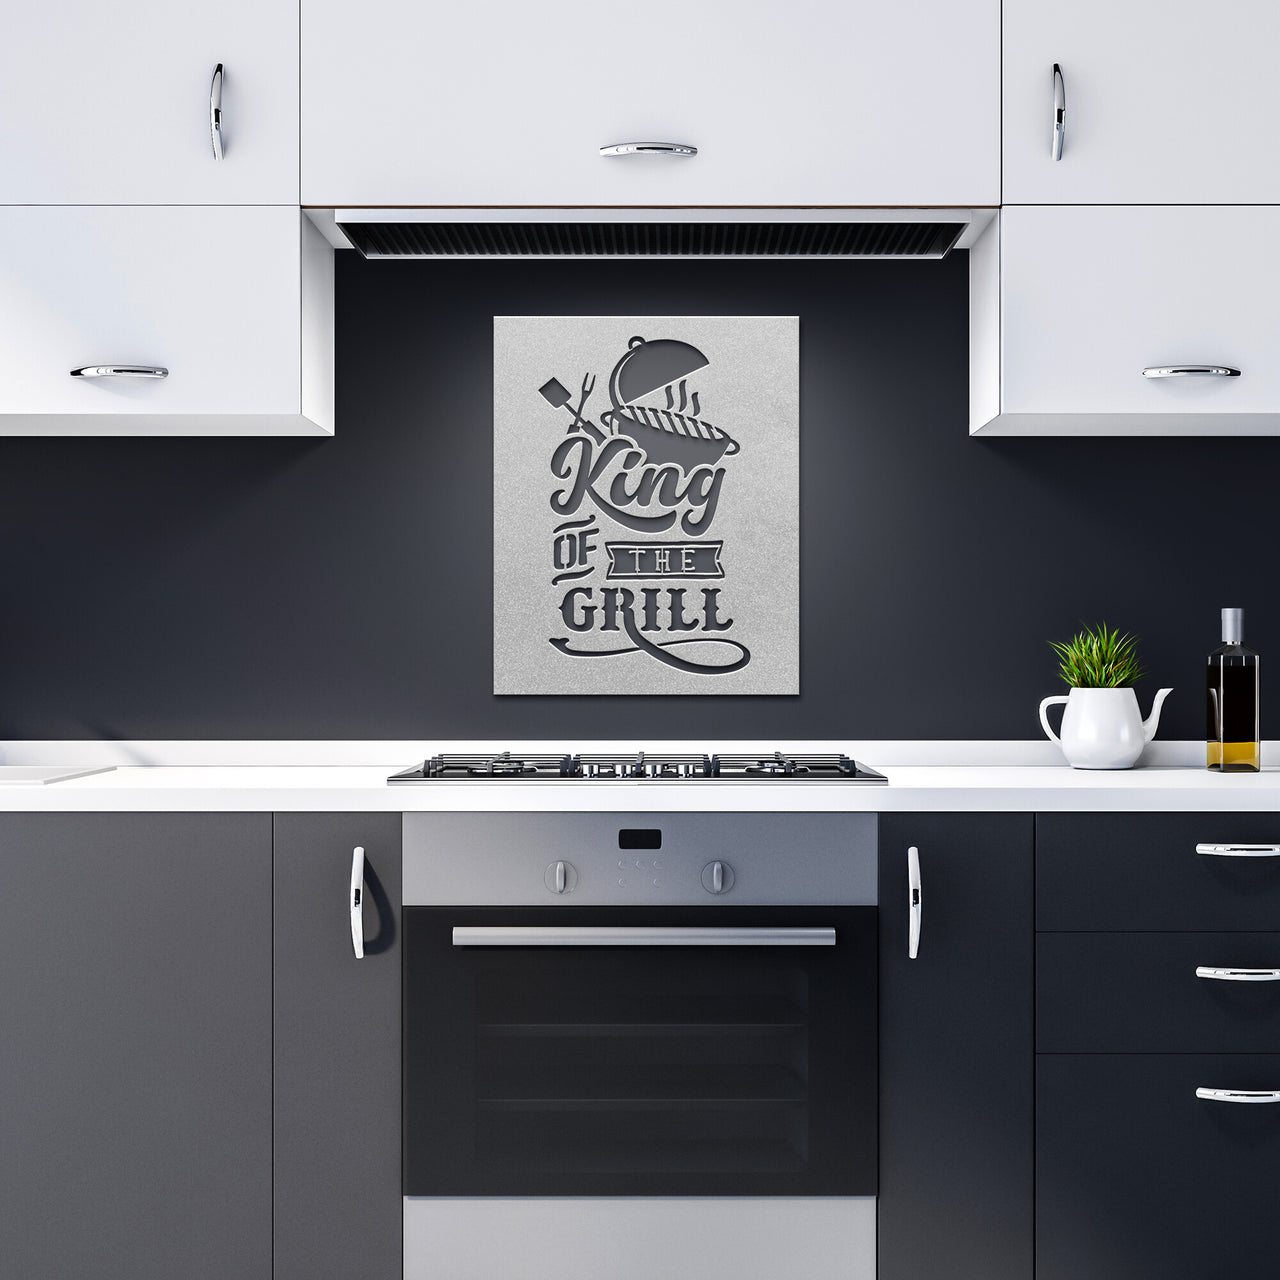 King of the grill-2_Steel Wall Art